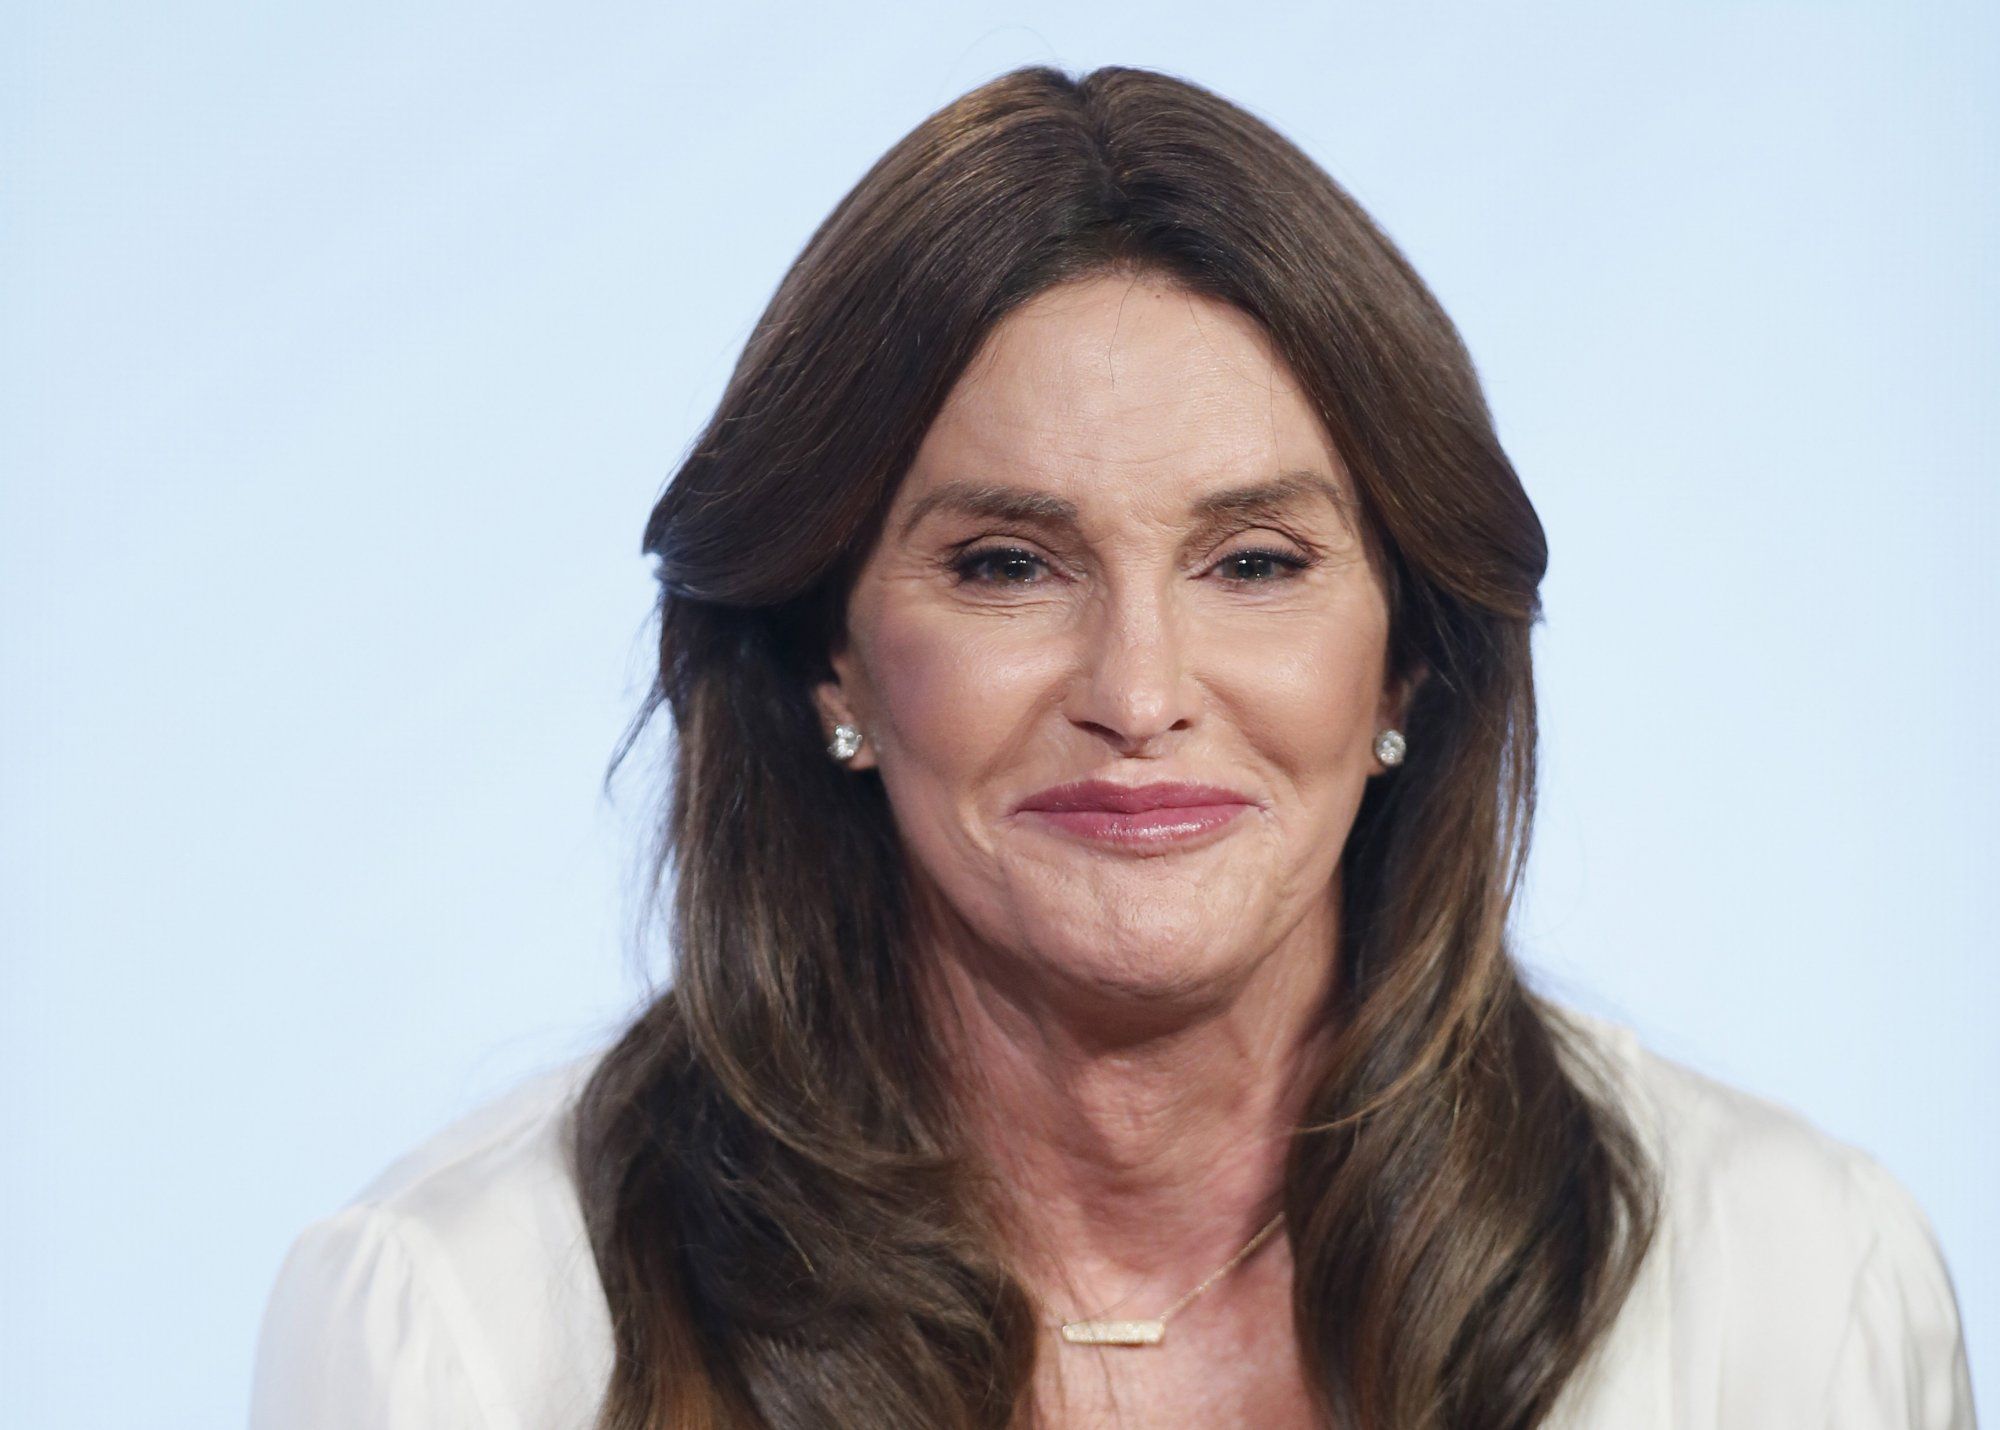 Pictures Of Caitlyn Jenner